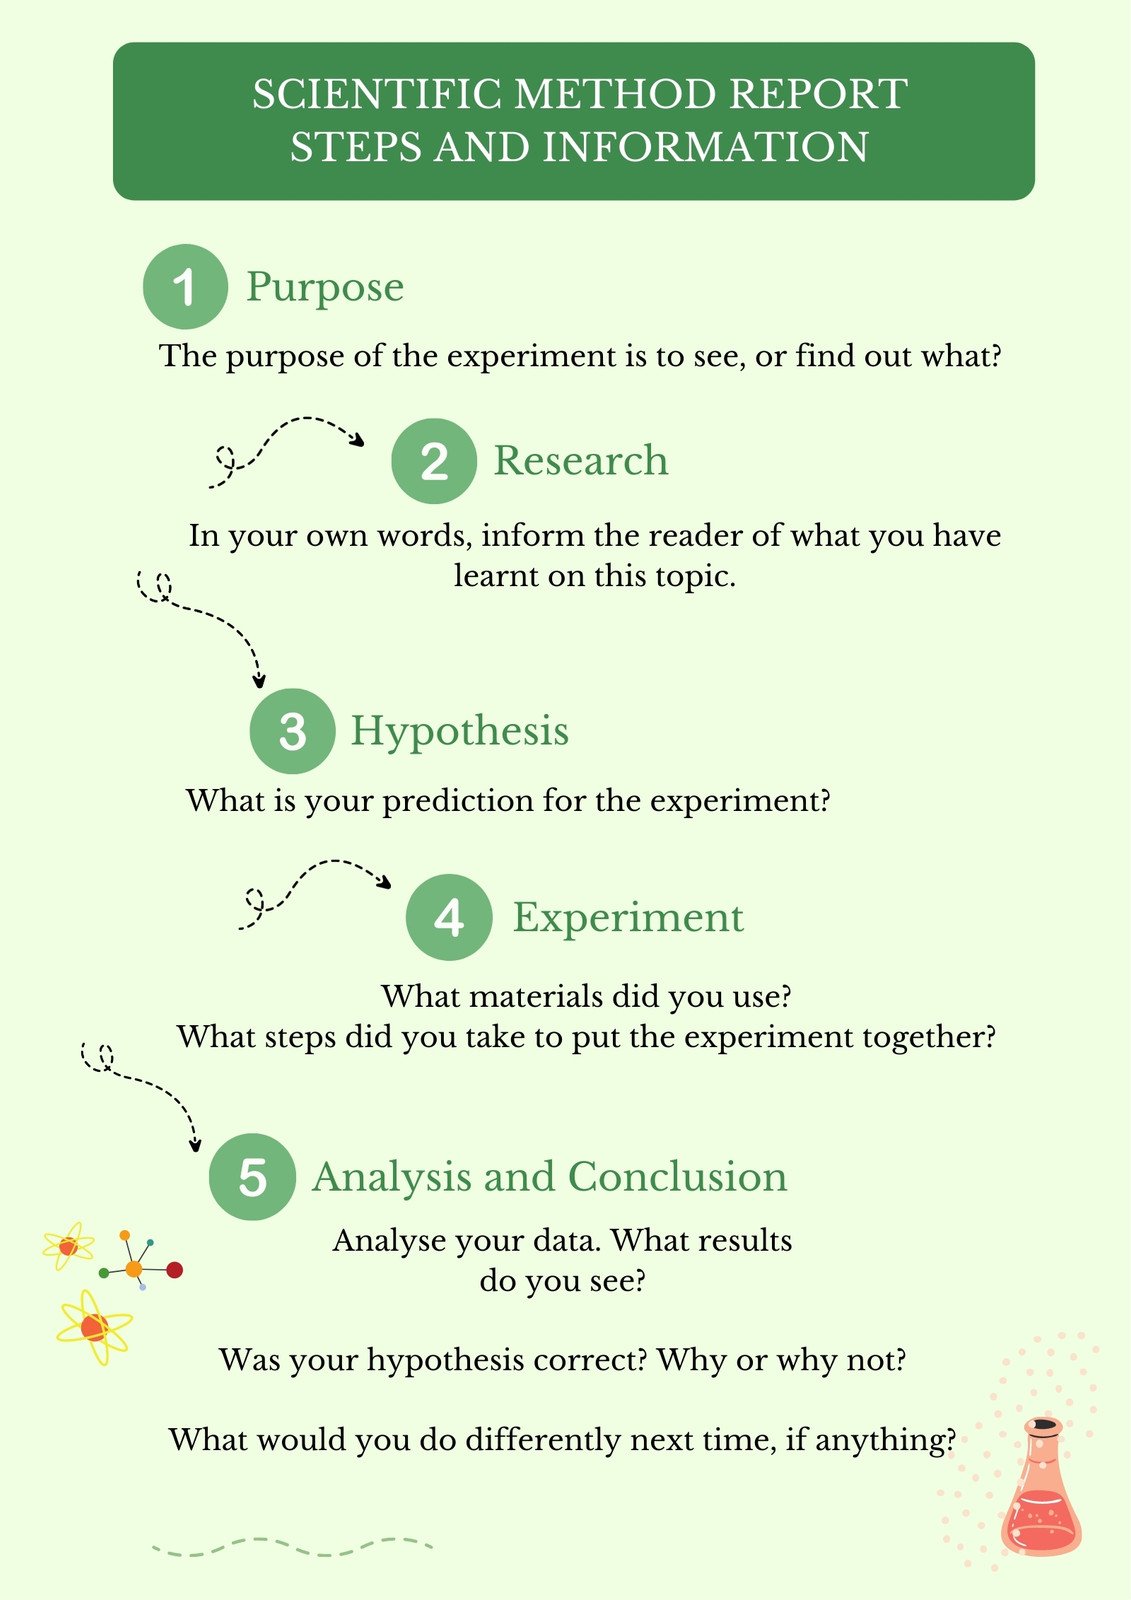 Scientific Method Report Steps and information (Poster)